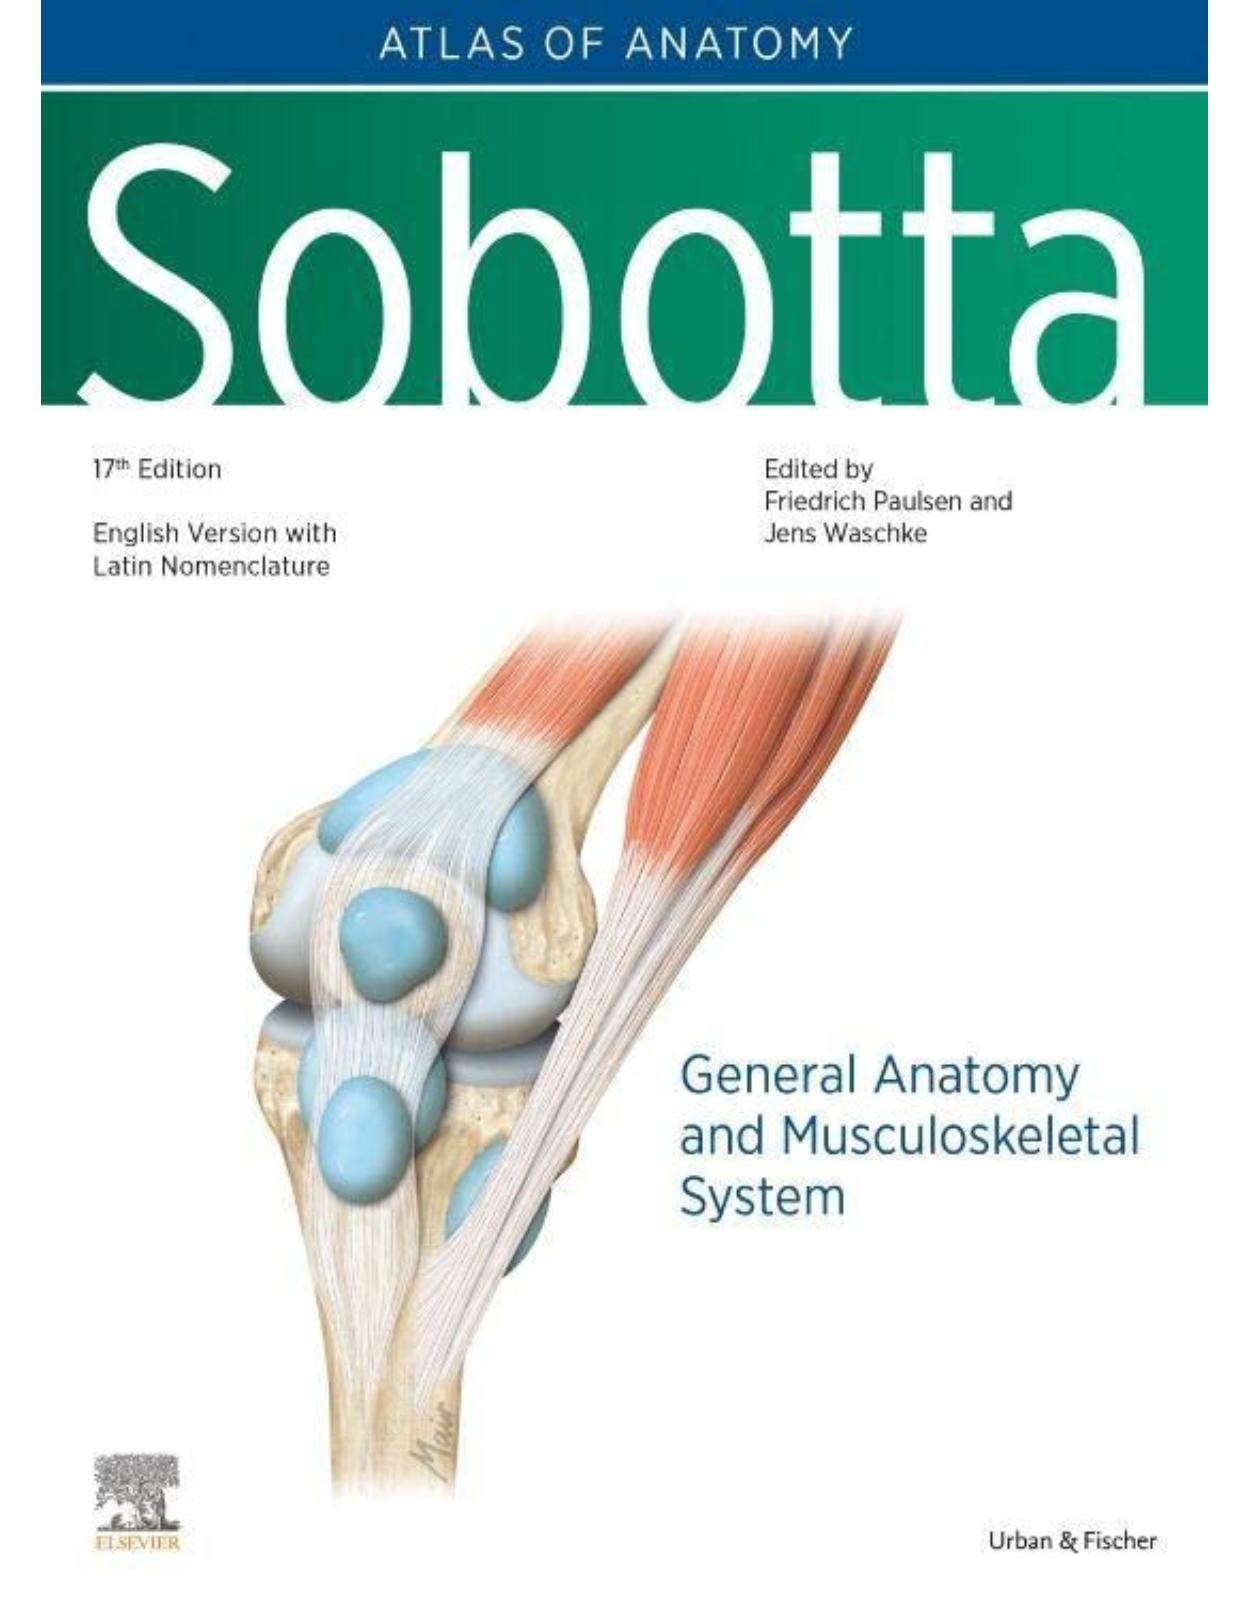 Sobotta Atlas of Anatomy, Vol.1, 17th ed. General Anatomy and Musculoskeletal System